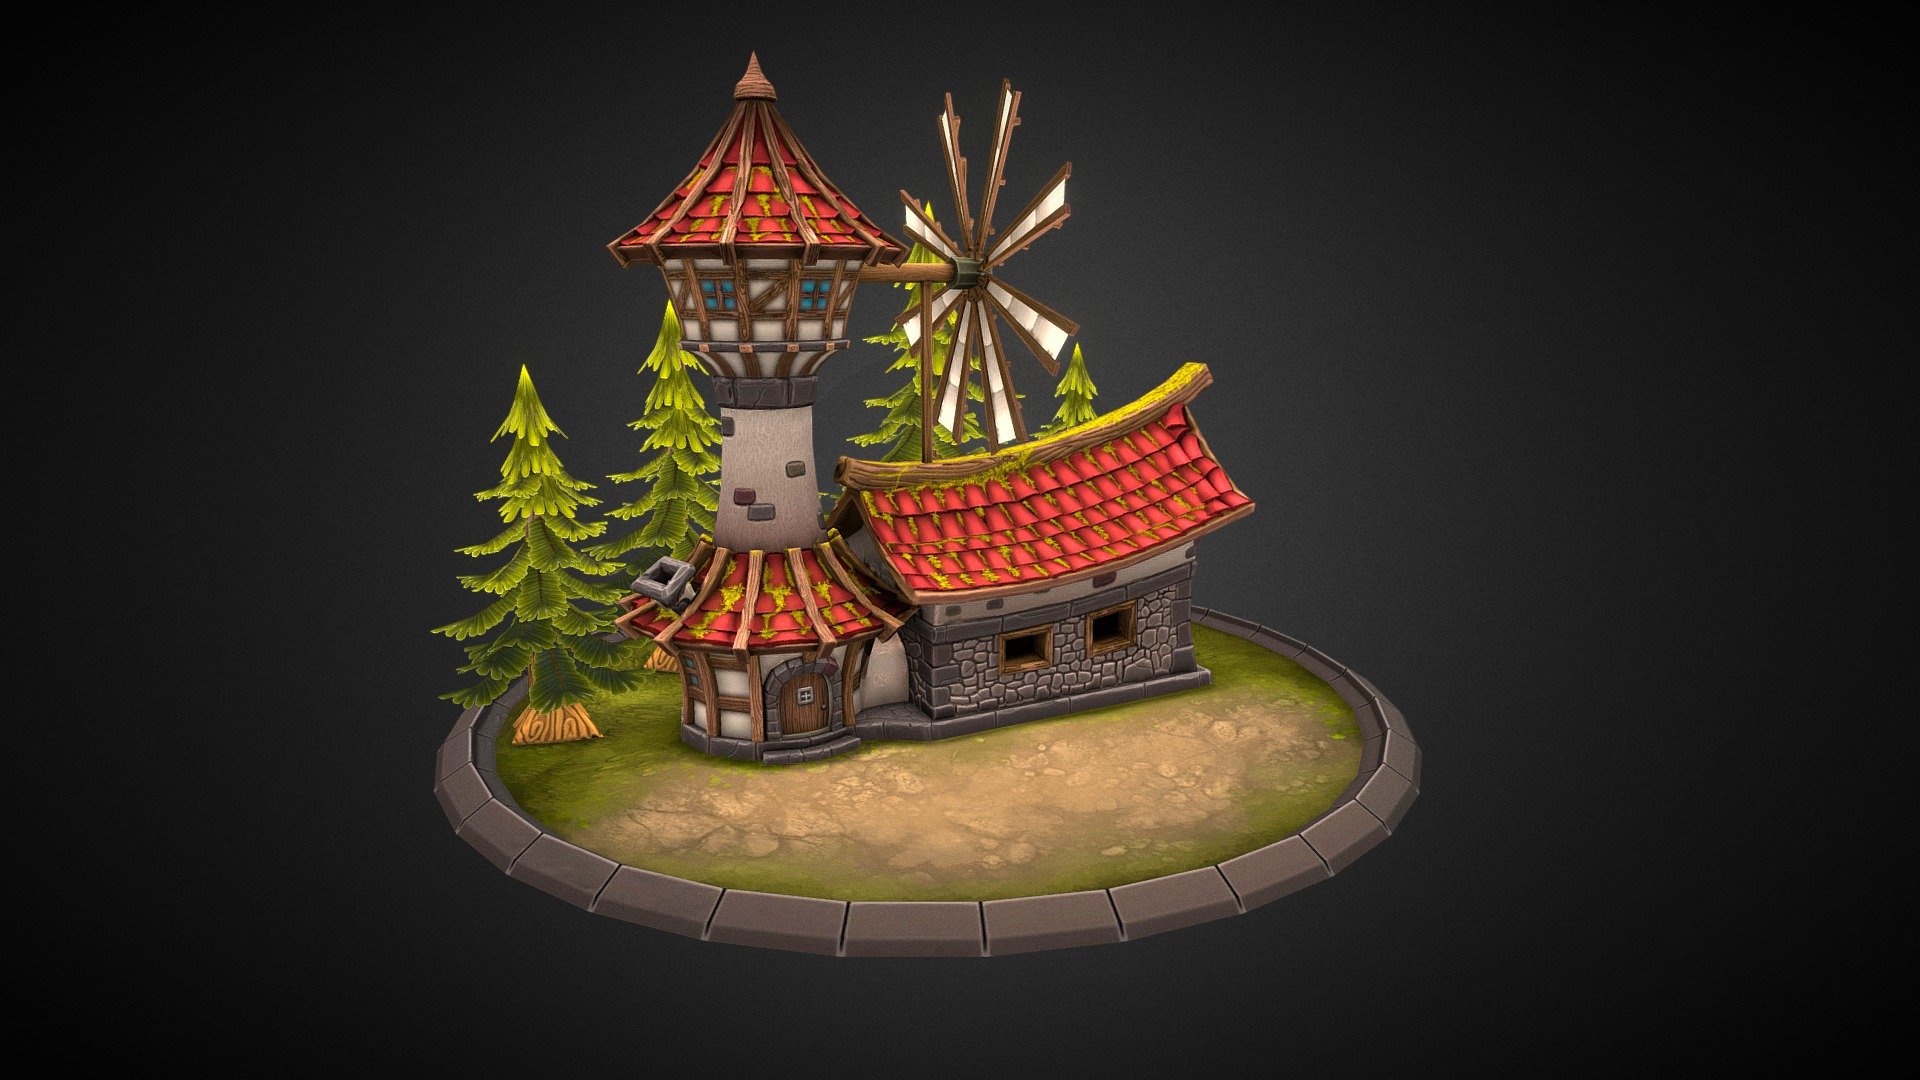 Another building completely modelled in #Blender and textured with #SubstancePainter. This time I tested with fast hand-painting style for the environment. I hope you like it. This time I wanted to add an animation for the diorama 3d model